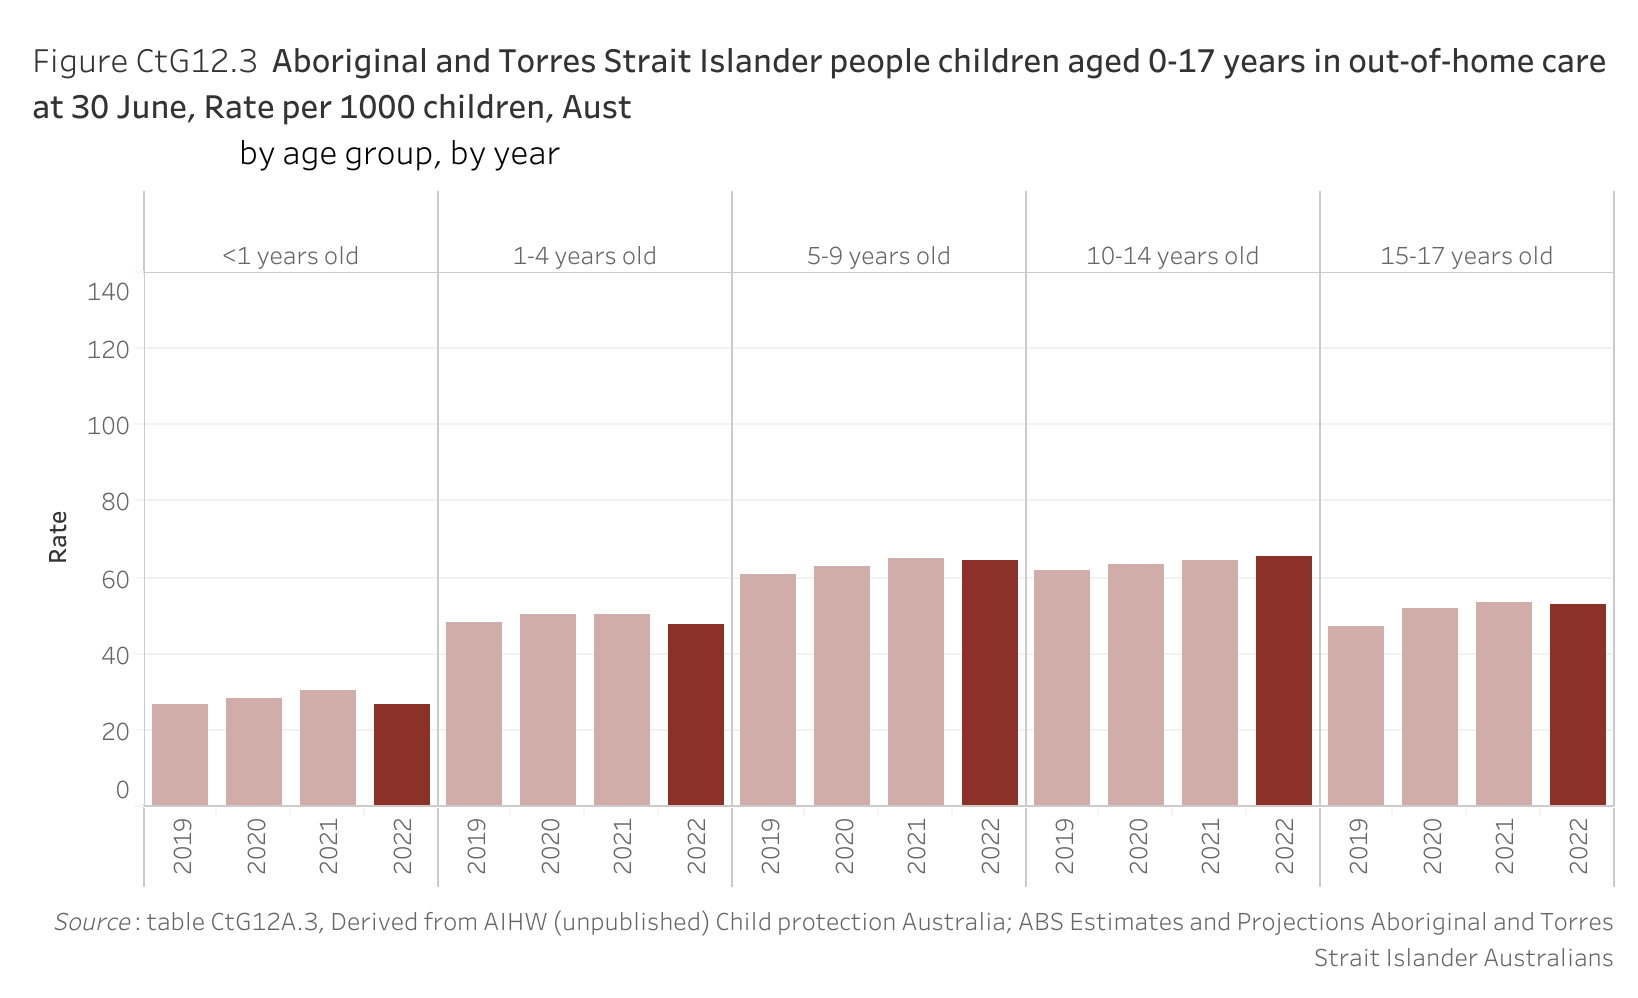 Figure CtG12.3 shows Aboriginal and Torres Strait Islander people children aged 0-17 years in out-of-home care at 30 June, Rate per 1000 children, Australia, by age group, by year. More details can be found within the text near this image.